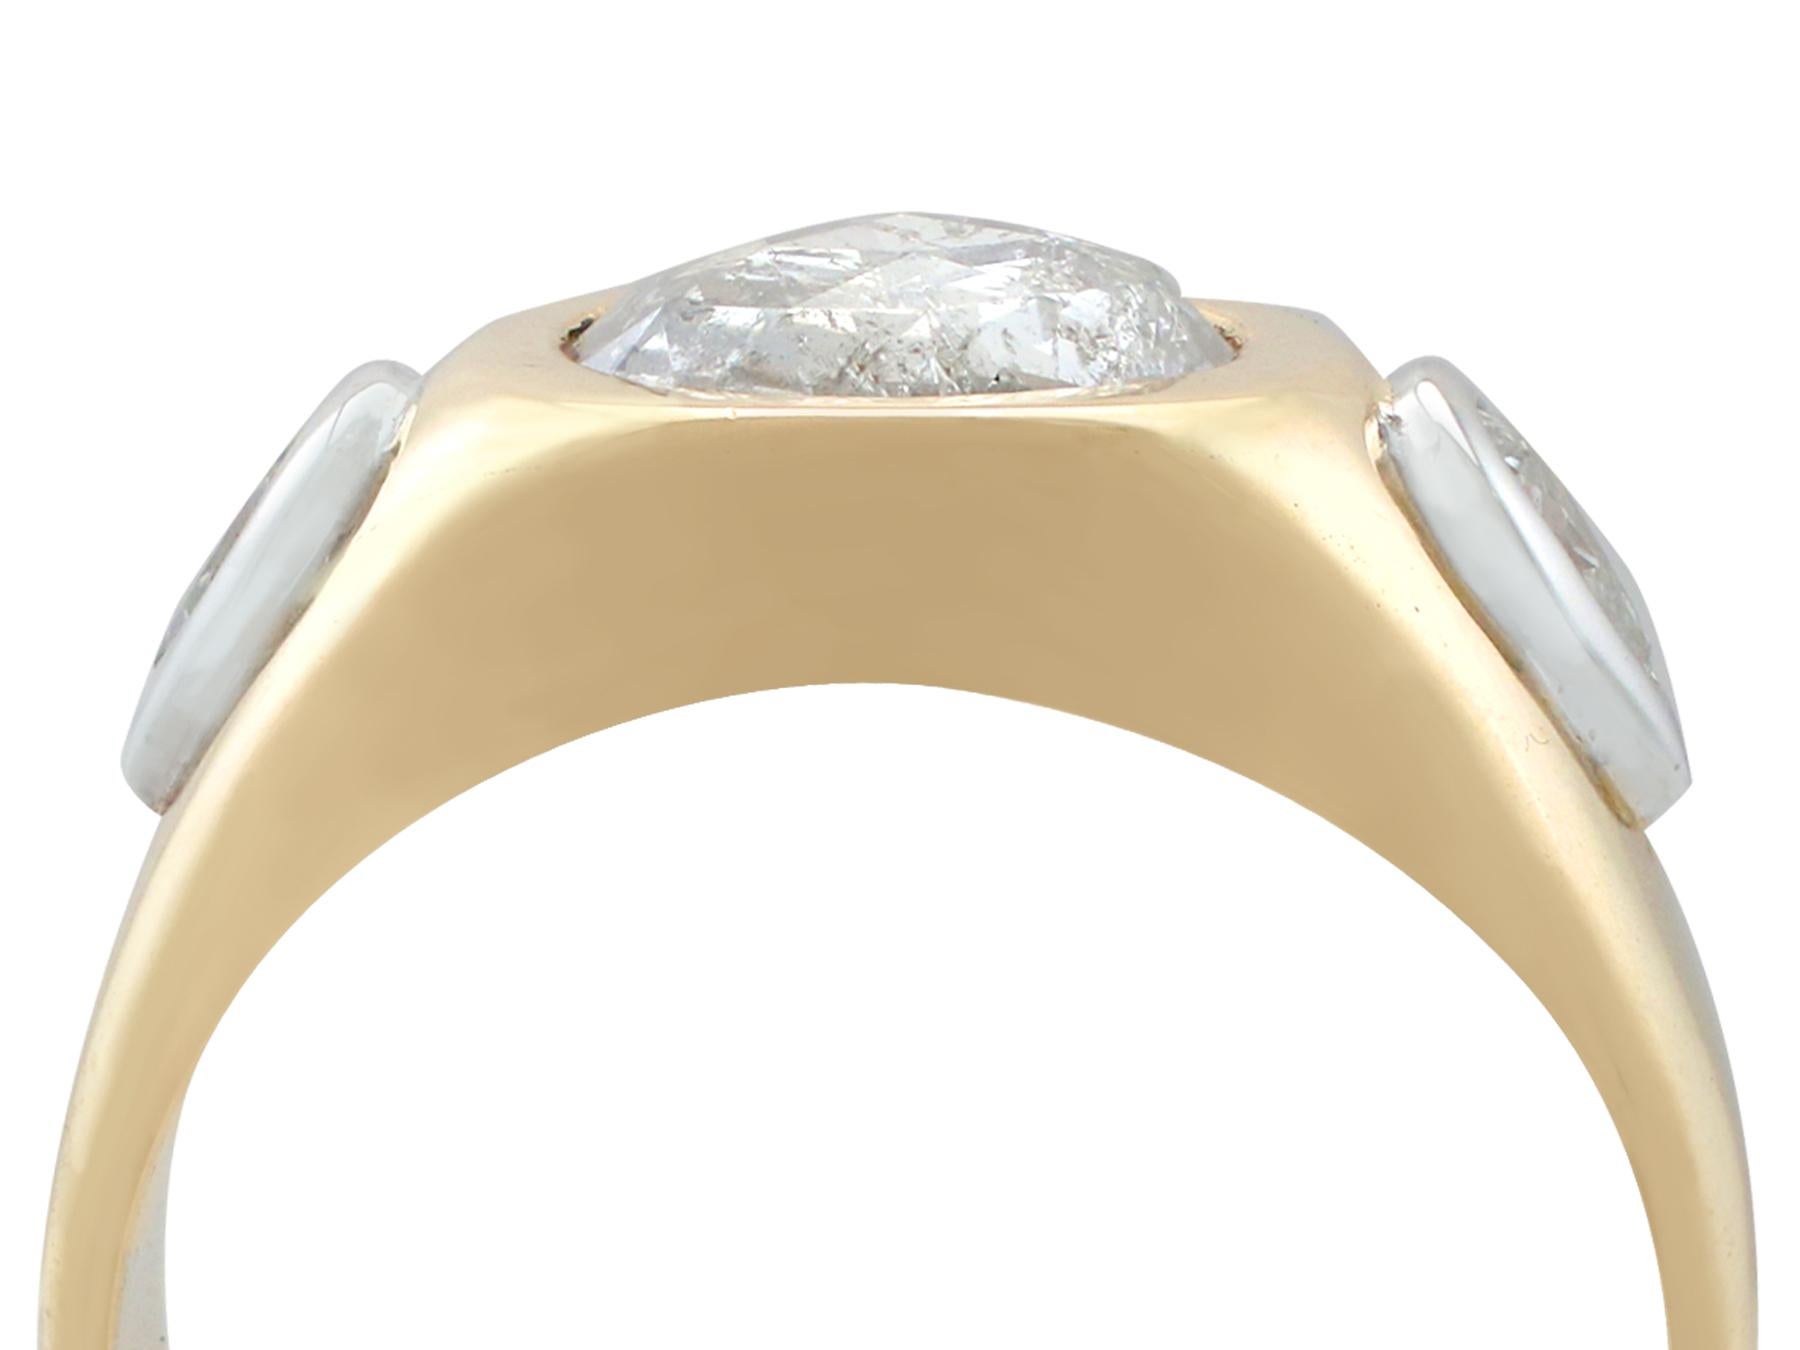 An impressive vintage French 1.45 Ct diamond and 18k yellow gold, 18k white gold set signet style ring; part of our diverse diamond jewelry and estate jewelry collections.

This stunning, fine and impressive diamond signet style ring has been